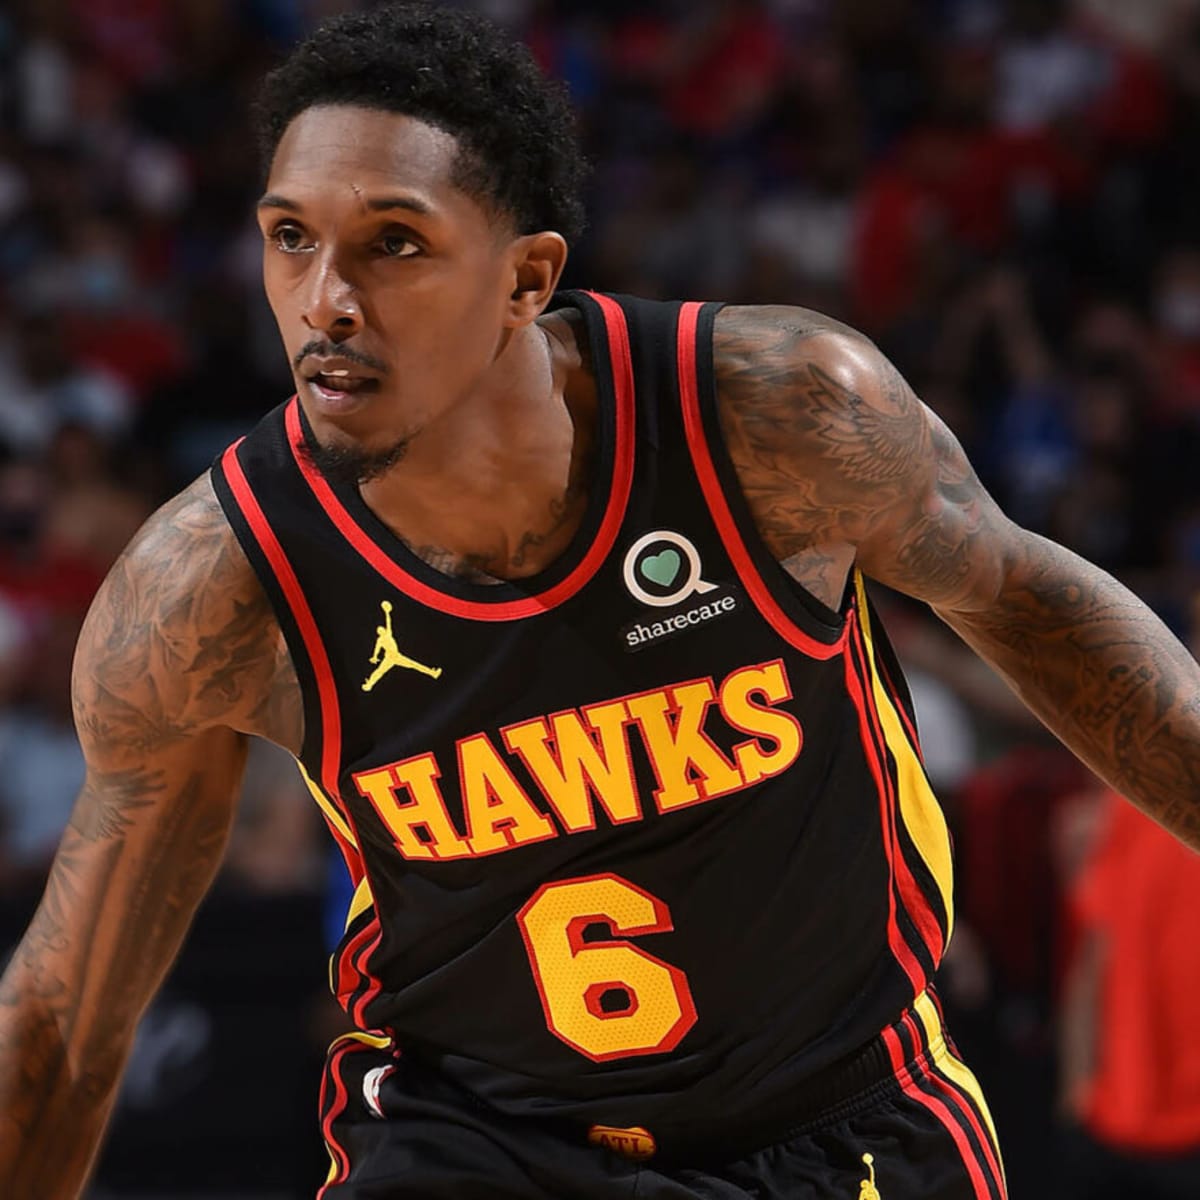 Lou Williams 2021: Net Worth, Salary and Endorsements